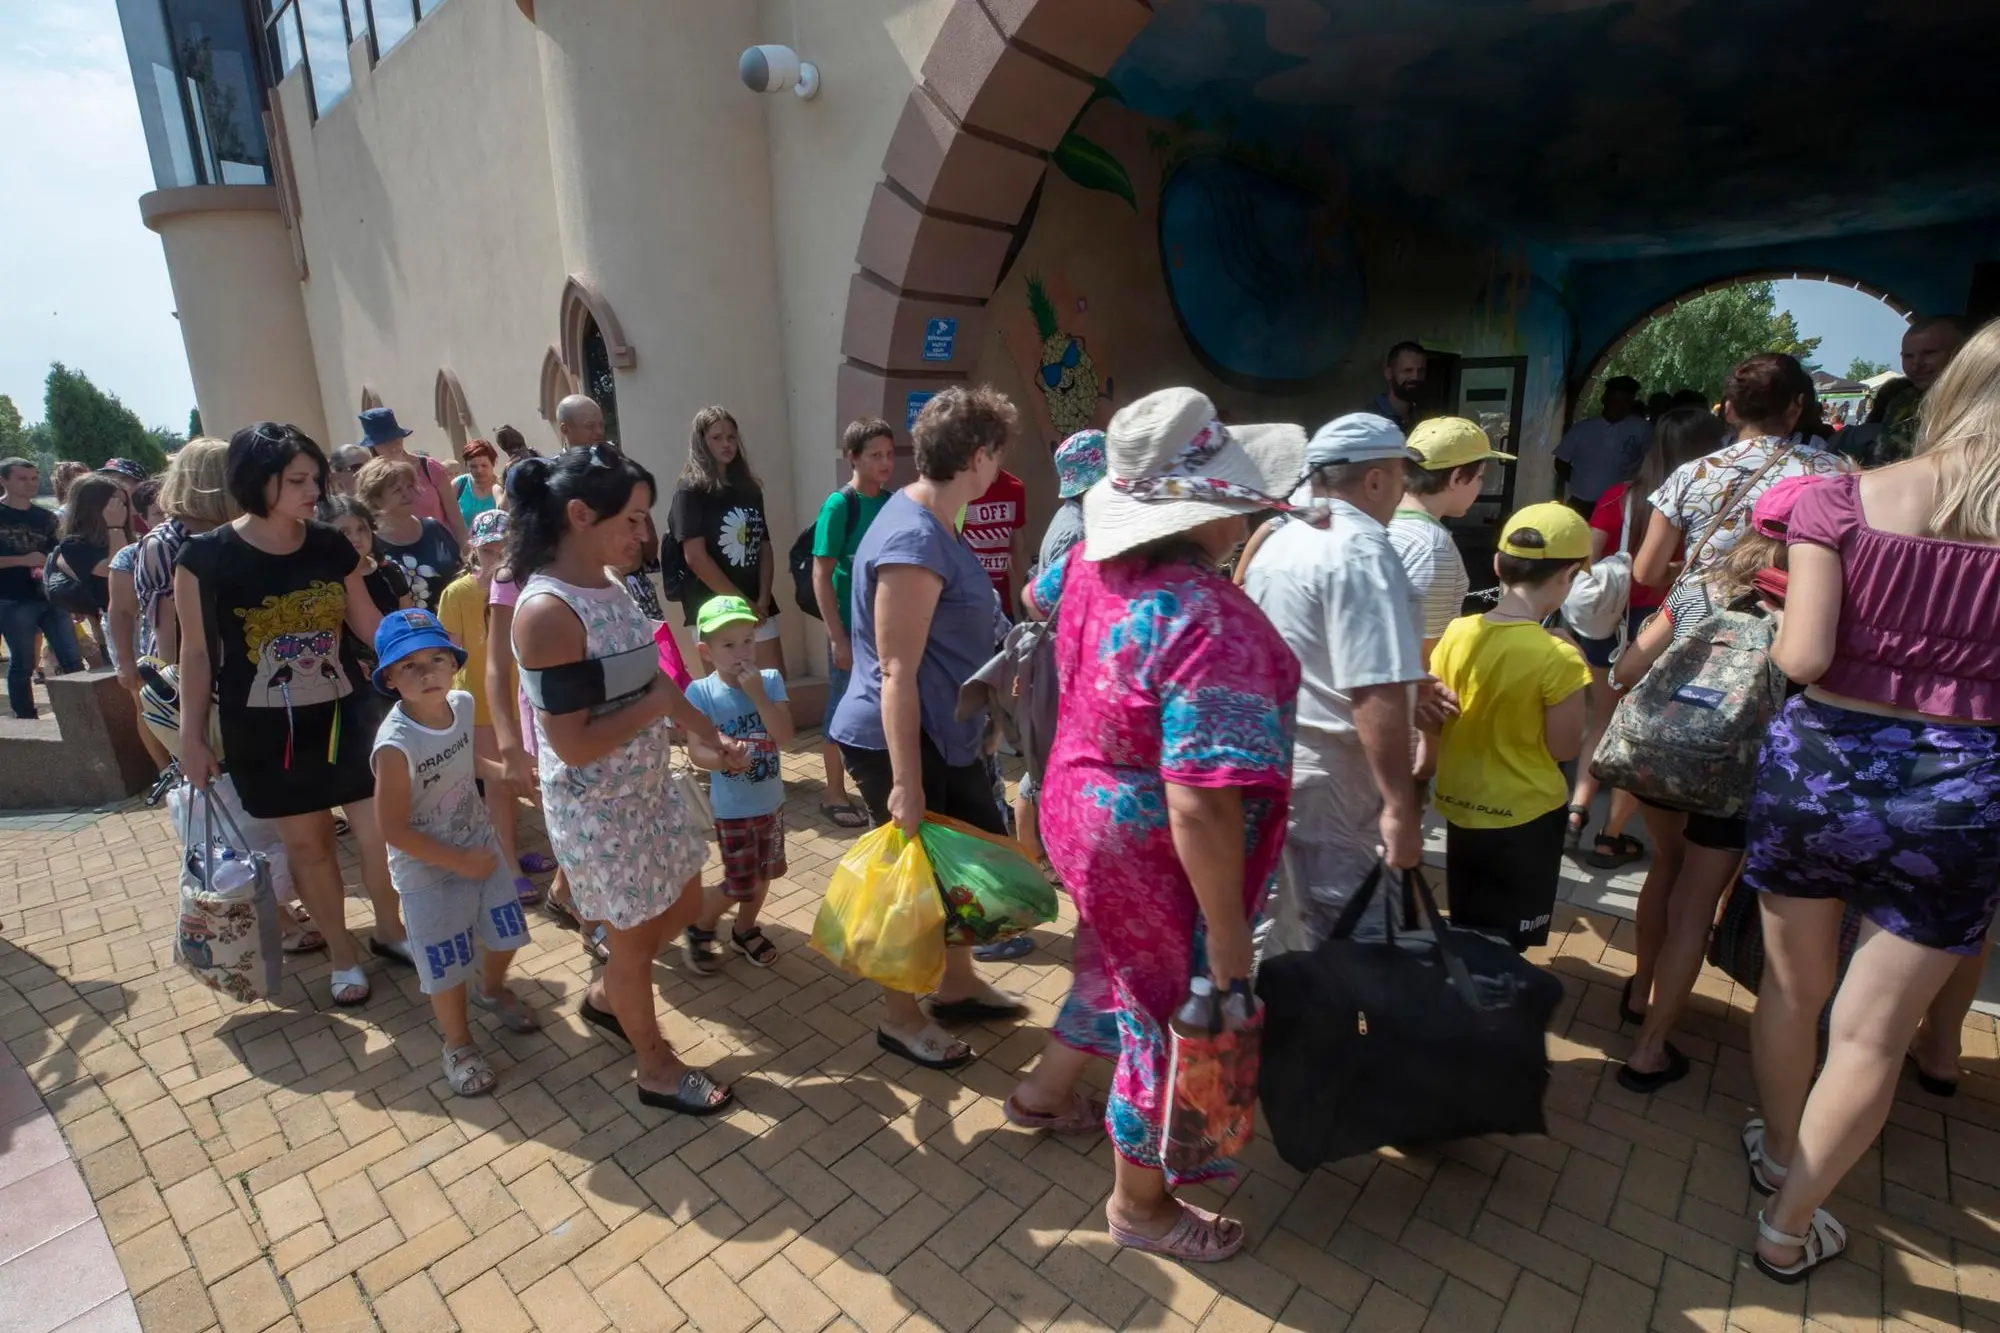 epa10116797 A picture taken during a visit to Berdyansk organised by the Russian military shows IDPs enter the water park for their free rest in Berdyansk, Zaporizhia region, Ukraine, 11 August 2022 (Issued 12 August 2022). The city of Berdyansk is located on the territory controlled by the troops of the Russian Federation and the city is administered by the Military-Civilian Administration controlled by Russia. Berdyansk is a large resort city on the shores of the Azov Sea. Thousands of vacationers visited it in the summer. This year, due to the conflict between Russia and Ukraine, the city's beaches and hotels are without tourists. City businessmen place some thousand IDPs from Mariupol and other parts of Ukraine in their recreation centres providing food, accommodation and rehabilitation for people. For IDPs with children, the city water park operates free of charge. The head of the Zaporizhia region, Yevgeny Balitsky, announced that he had signed an order to hold a referendum on the issue of joining the region to Russia in early September 2022. Twelve headquarters for preparations for a referendum on joining the Russian Federation opened in Berdyansk and Berdyansk district of Zaporizhia region, said the head of the military-civilian administration of Berdyansk and Berdyansk region Alexander Saulenko. On 24 February 2022 Russian troops entered the Ukrainian territory in what the Russian president declared a 'Special Military Operation', starting an armed conflict that has provoked destruction and a humanitarian crisis. EPA/SERGEI ILNITSKY